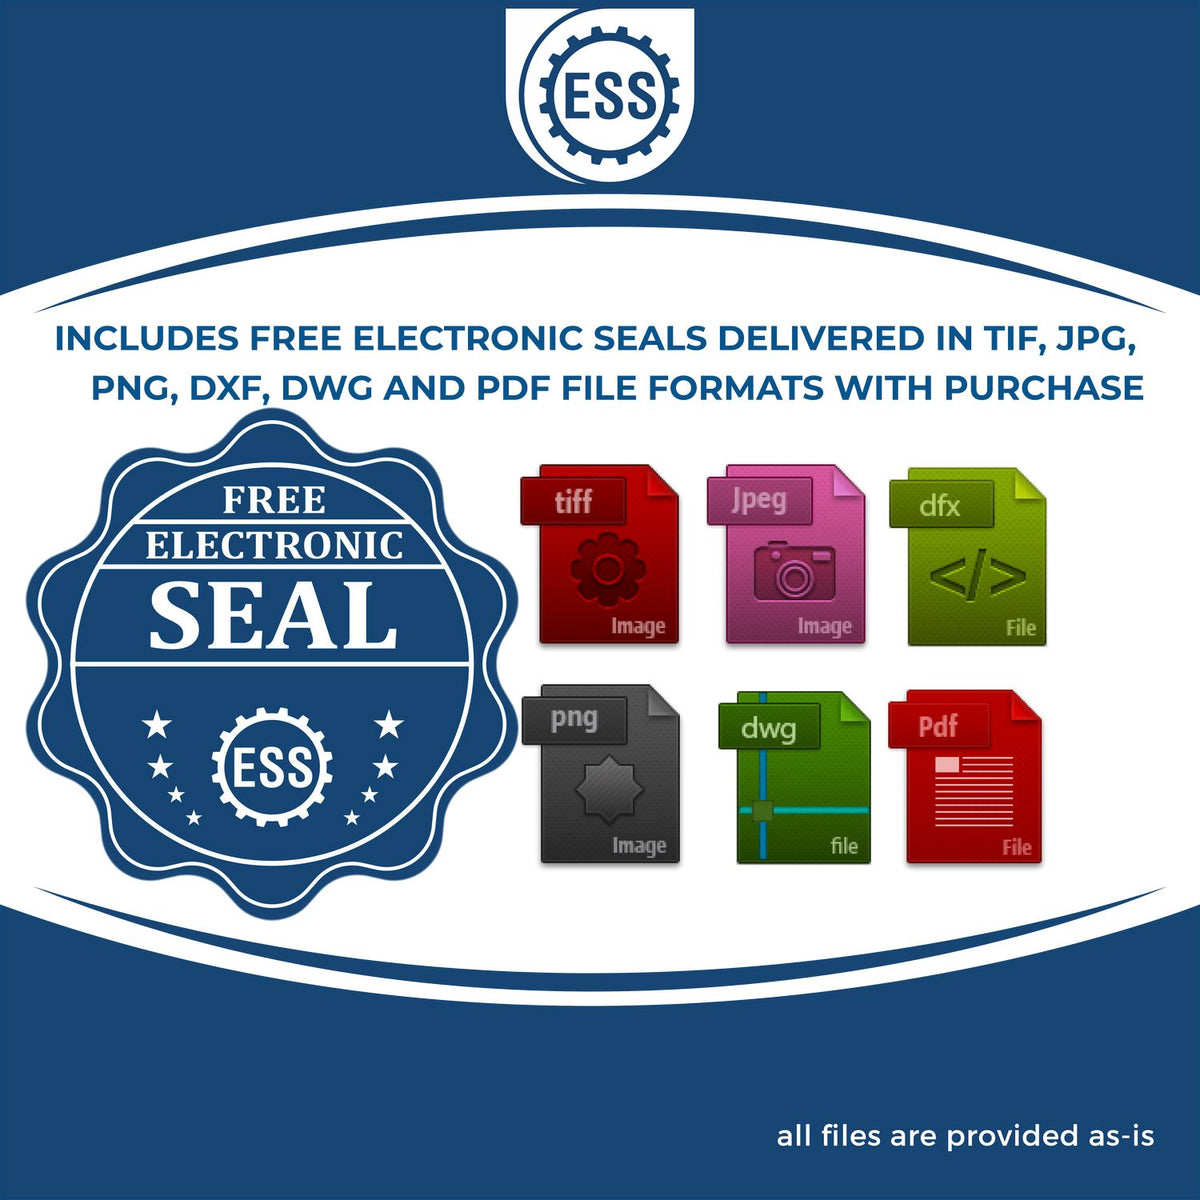 An infographic for the free electronic seal for the Oregon Professional Geologist Seal Stamp illustrating the different file type icons such as DXF, DWG, TIF, JPG and PNG.